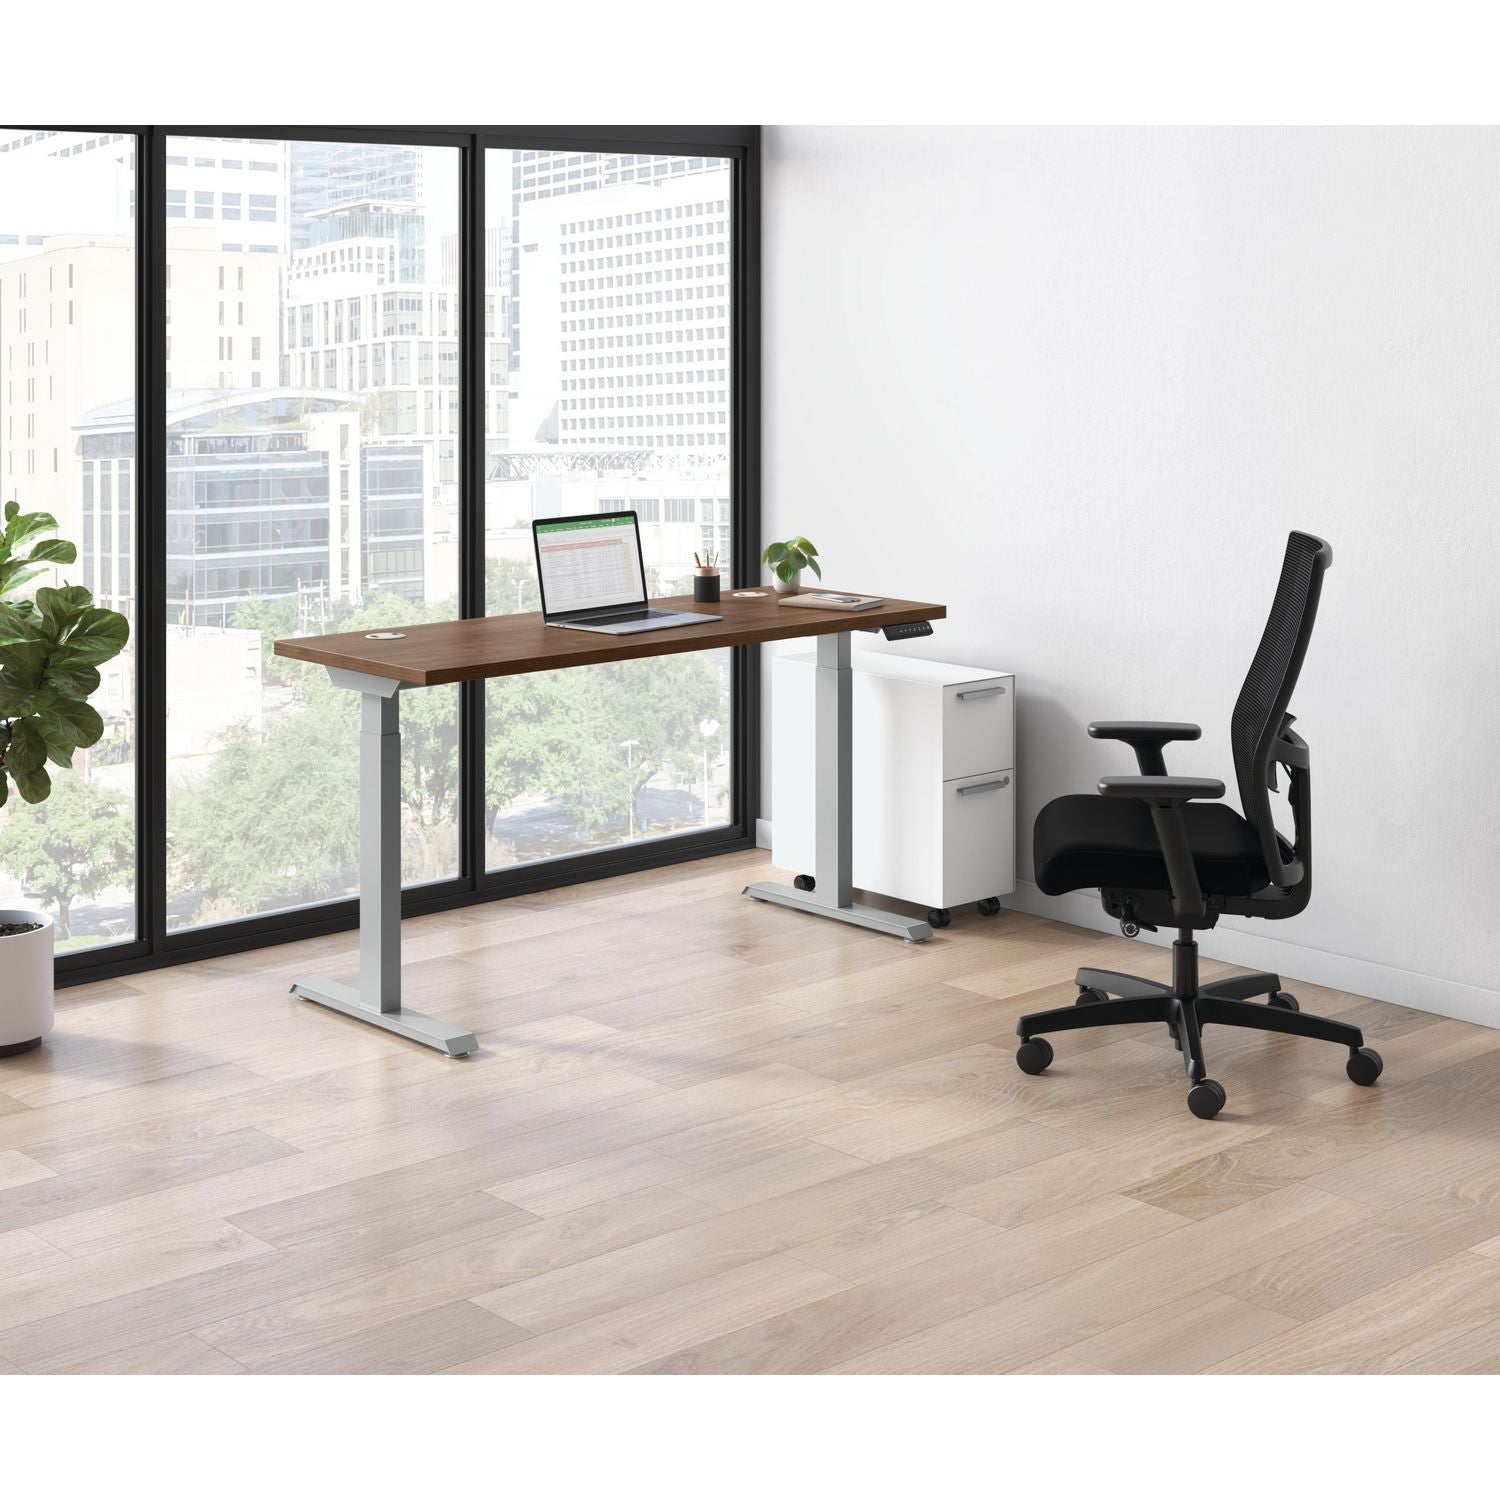 coordinate-height-adjustable-desk-bundle-2-stage-58-x-22-x-2775-to-47-pinnacle\\silver-ships-in-7-10-business-days_honhat2spns2258 - 6